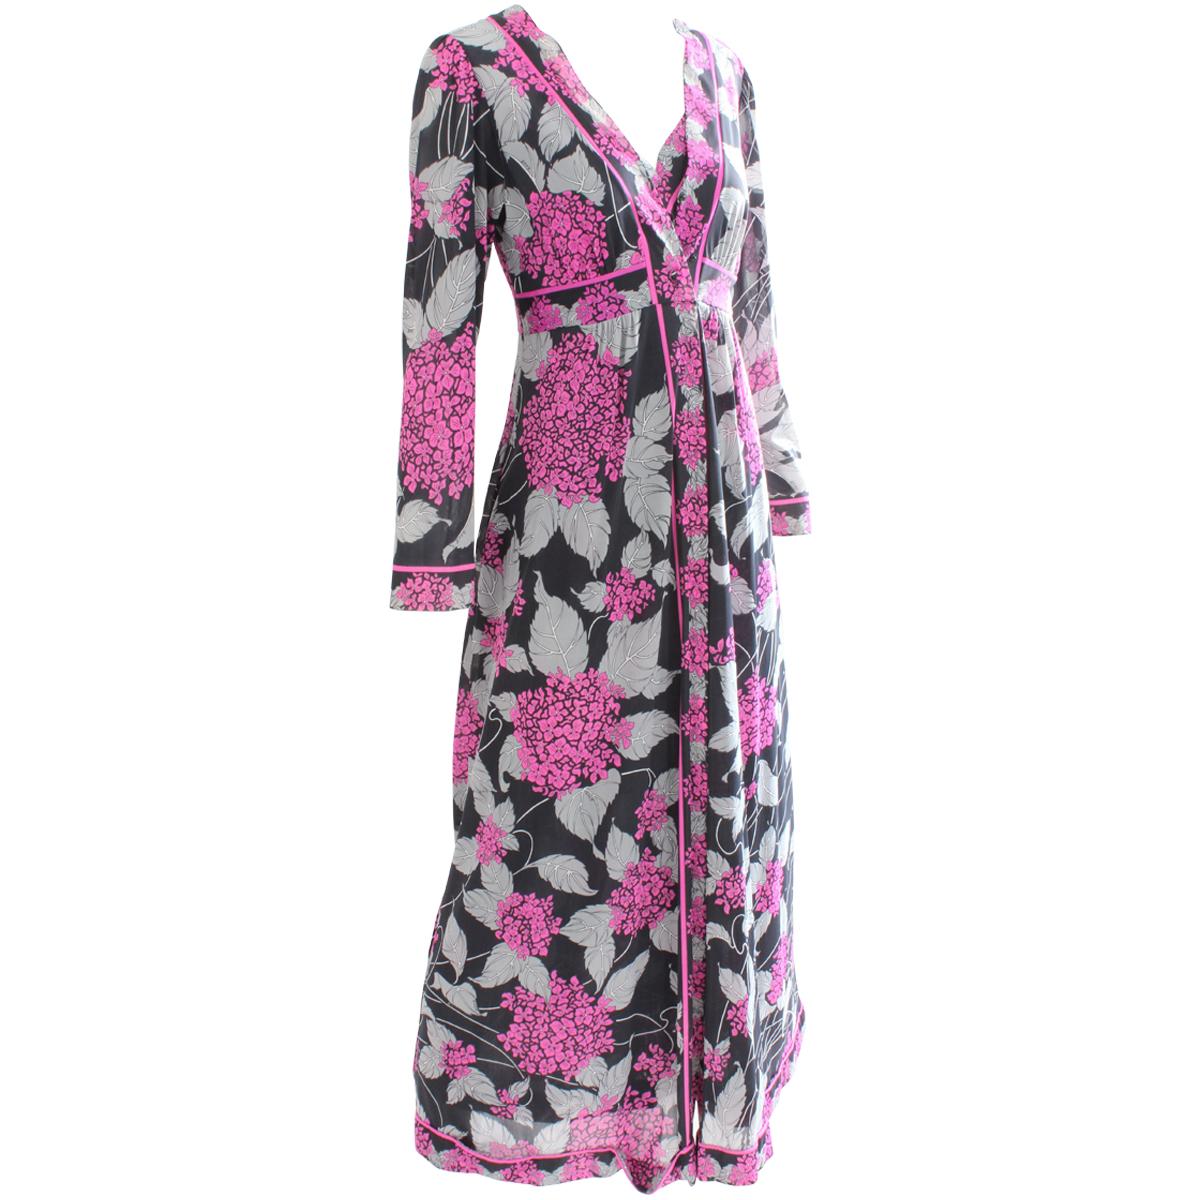 Emilio Pucci Long Nightgown & Matching Robe 2pc Set Abstract Floral Print S/M 